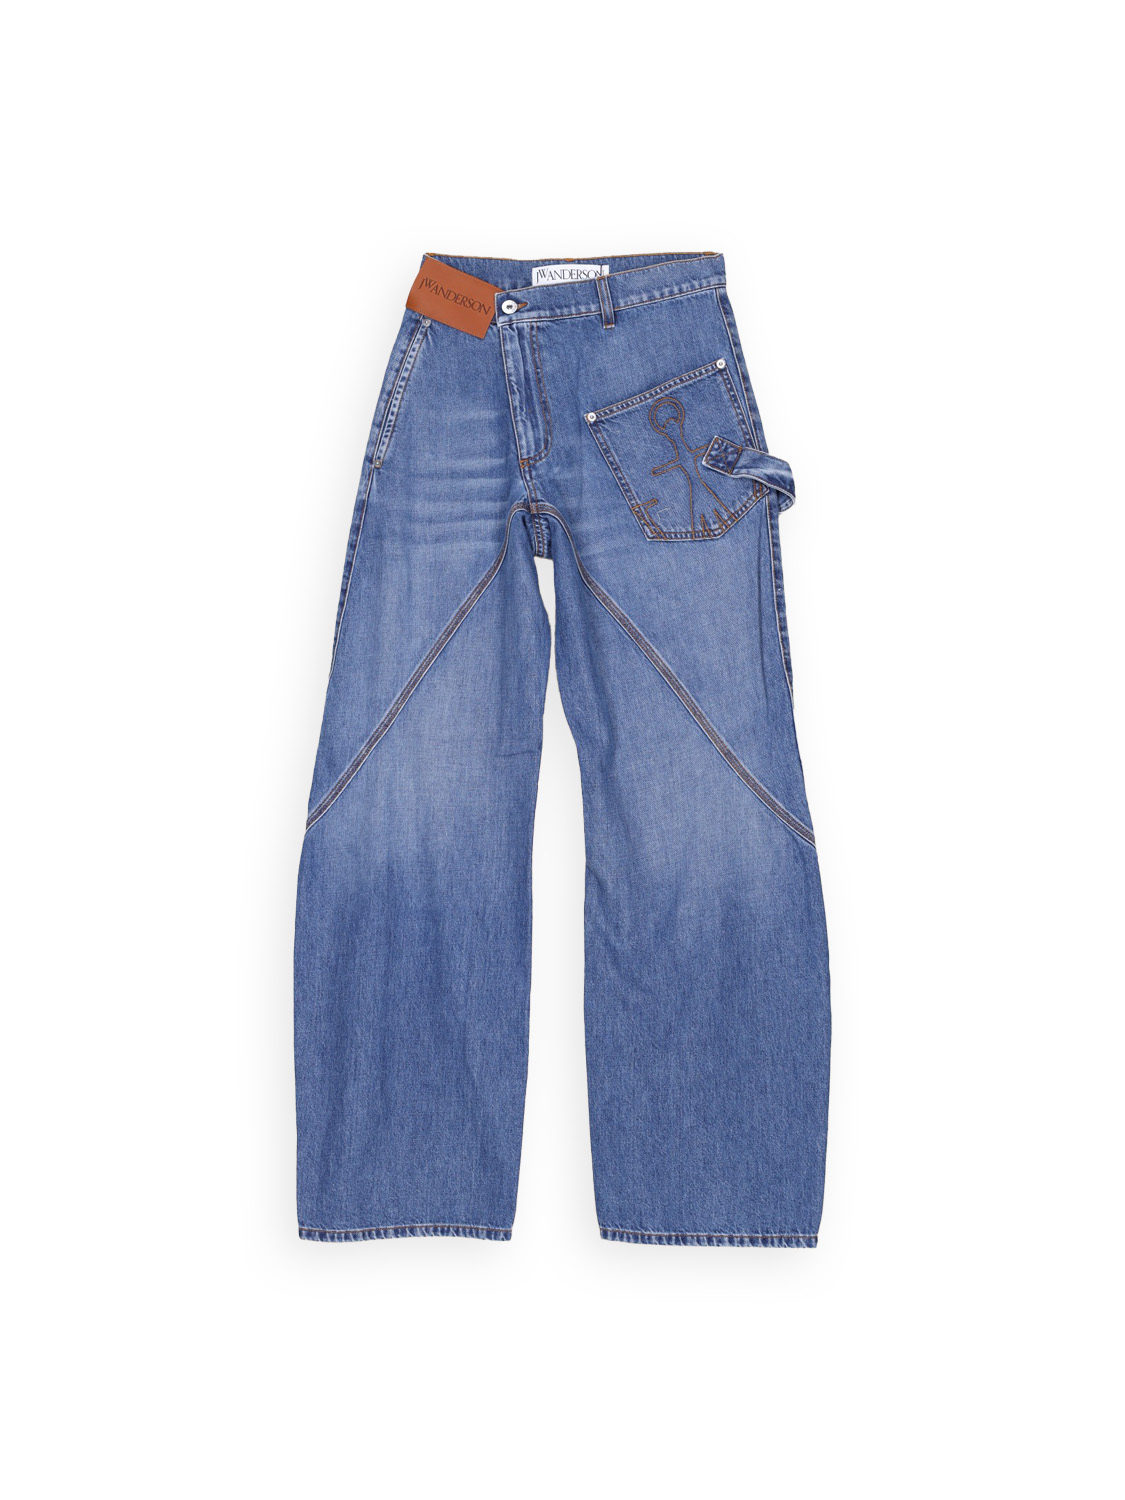 Worker-style blue jeans in rugged cotton 